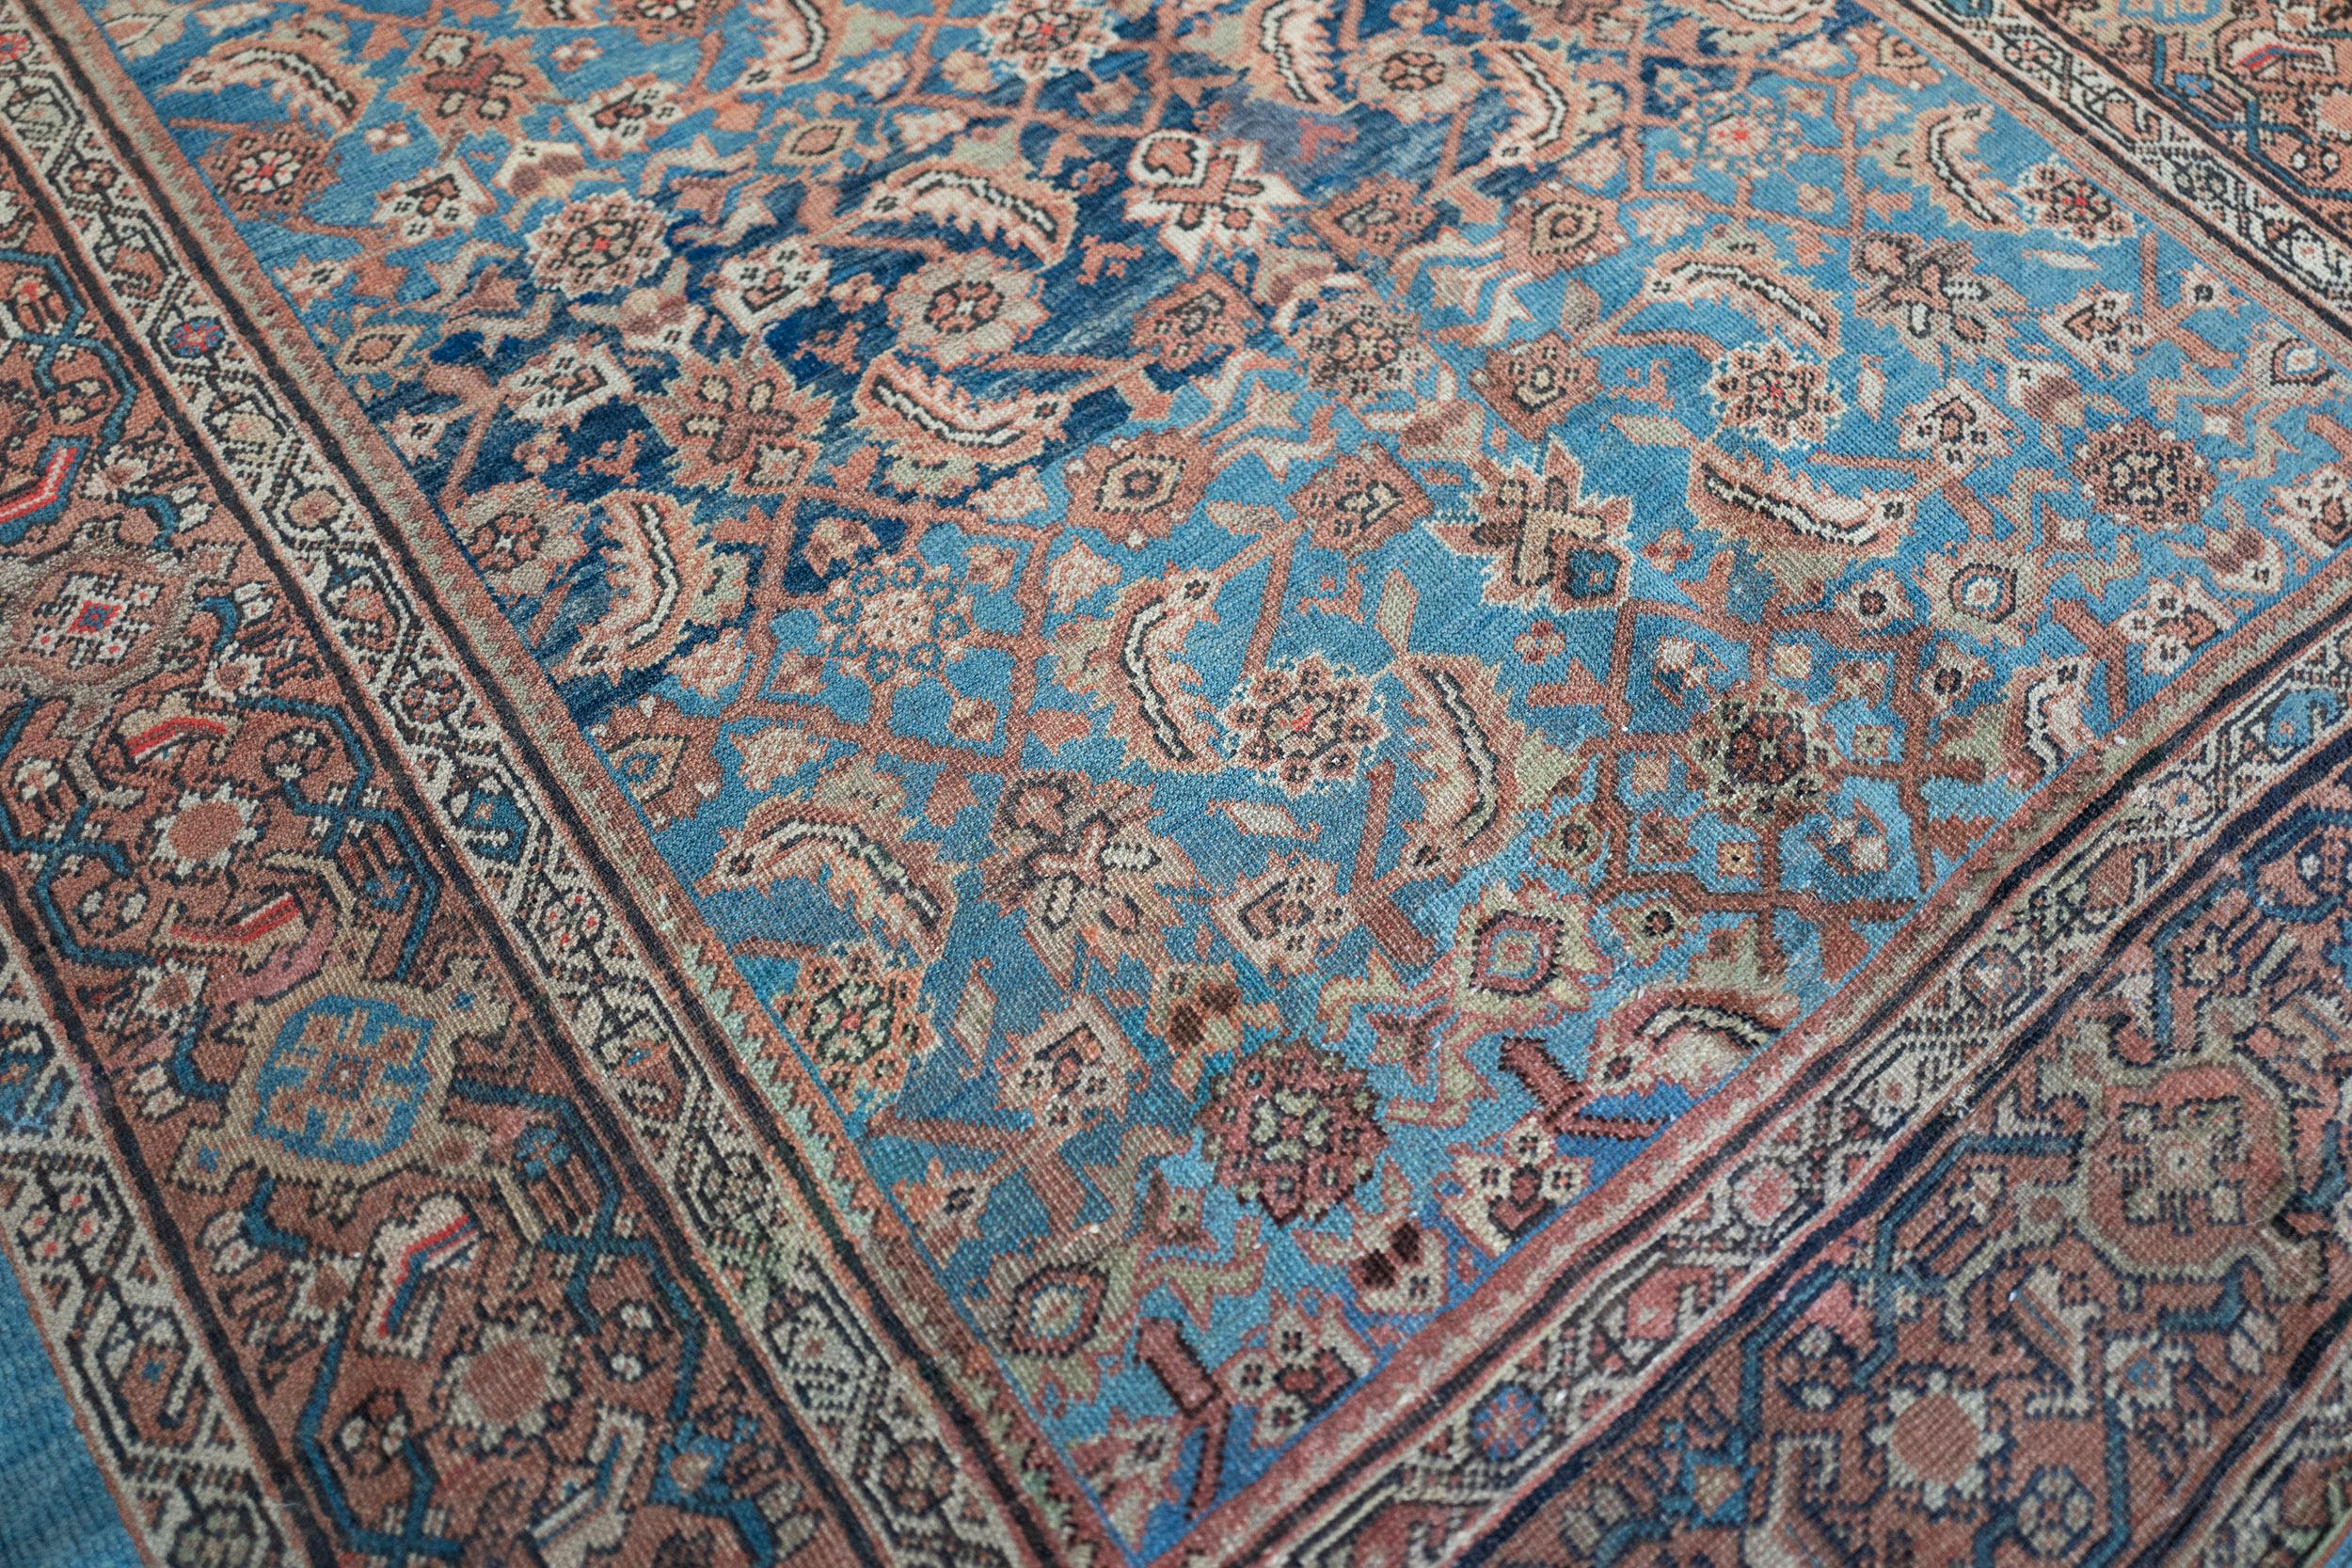 Hand-Knotted Hand-Woven Late 19th Century Sultanabad Rug from West Persia